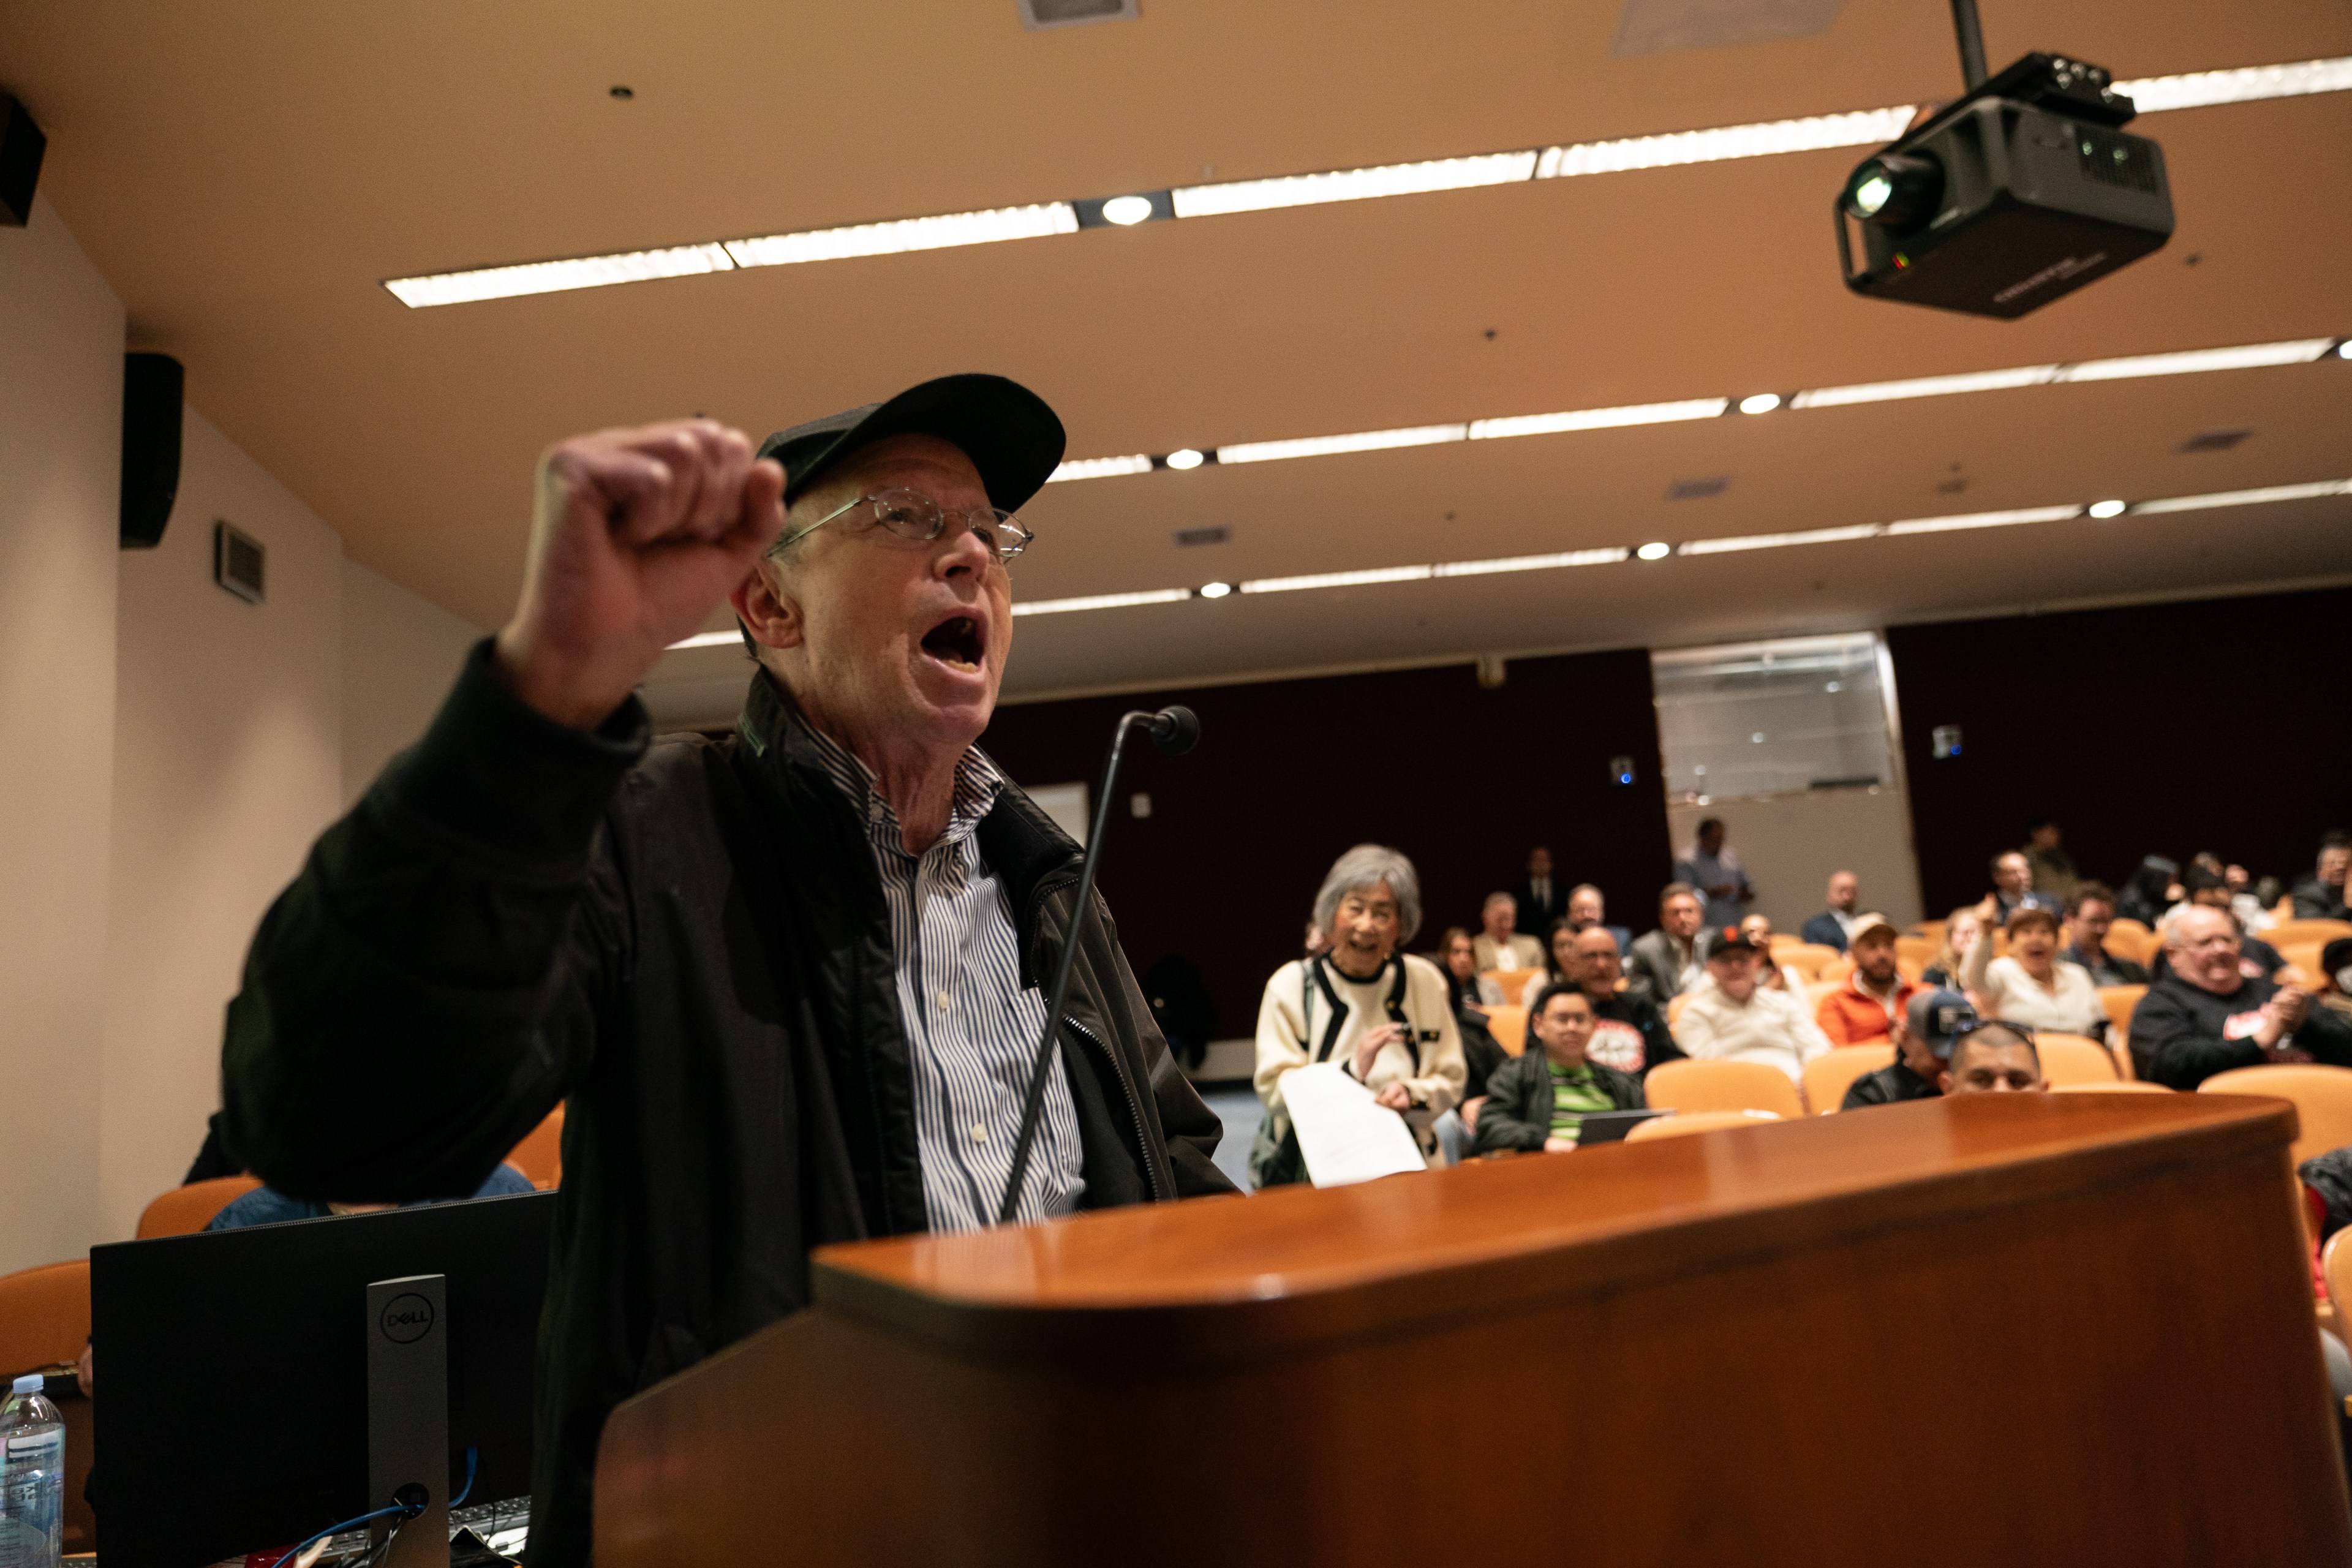 man with hat shouting at a lectern